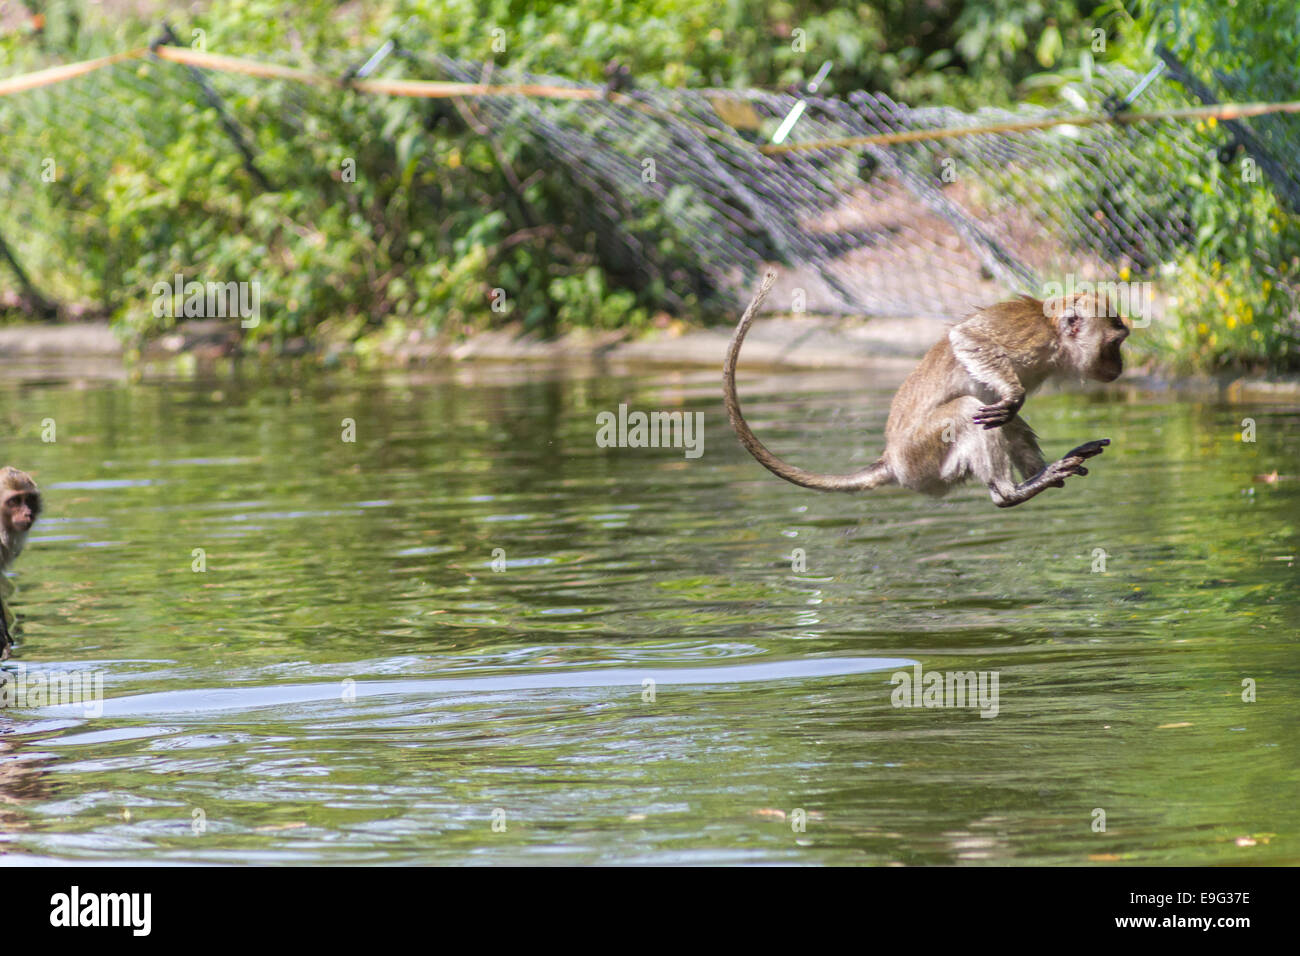 Jumping monkey directly above the water Stock Photo